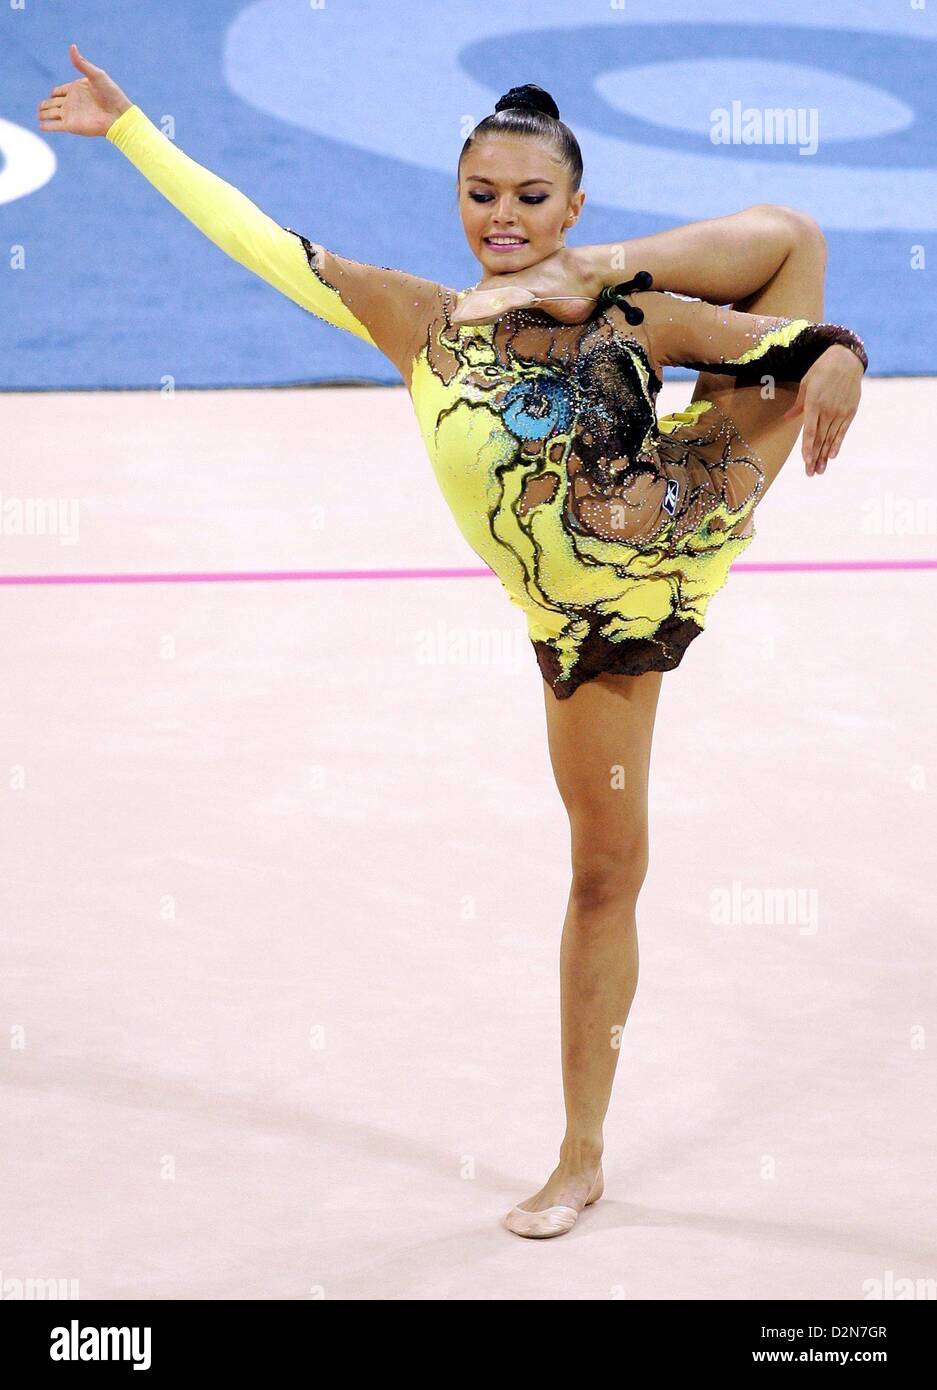 (FILE) An archive photo dated 27 August 2004 shows Russia's Alina Kabaeva performs with the clubs during the rhythmic gymnastics combined qualifications in Athens, Greece. She was a two-time world champion and won bronze in Sydney. She was later banned for doping. Photo: Gero Breloer Stock Photo